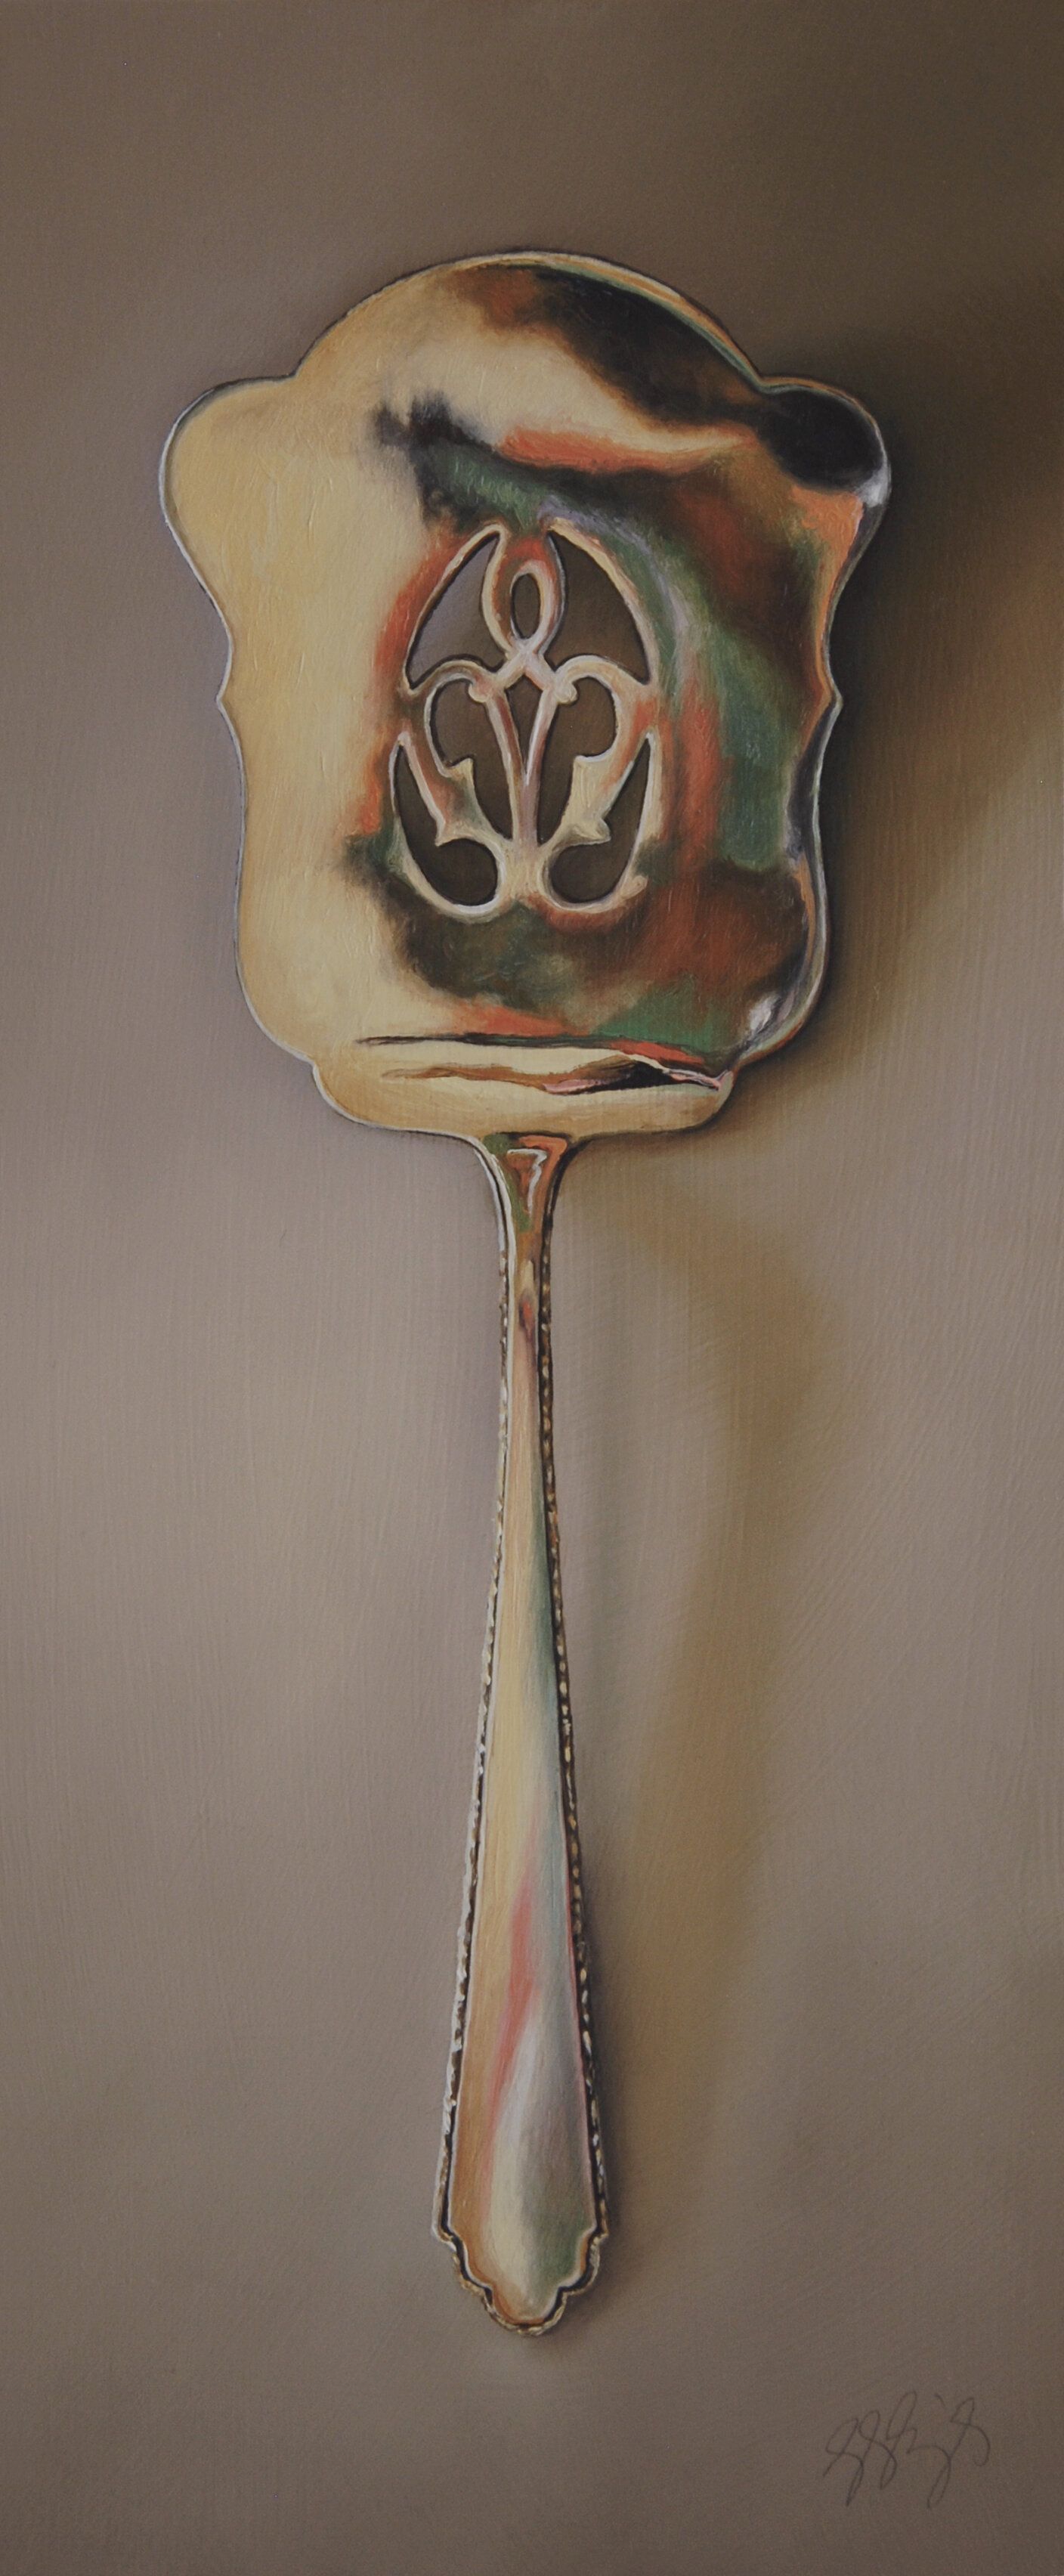   Silver Server #9, The Loyalist  Oil on panel, 2020. 12x5” 